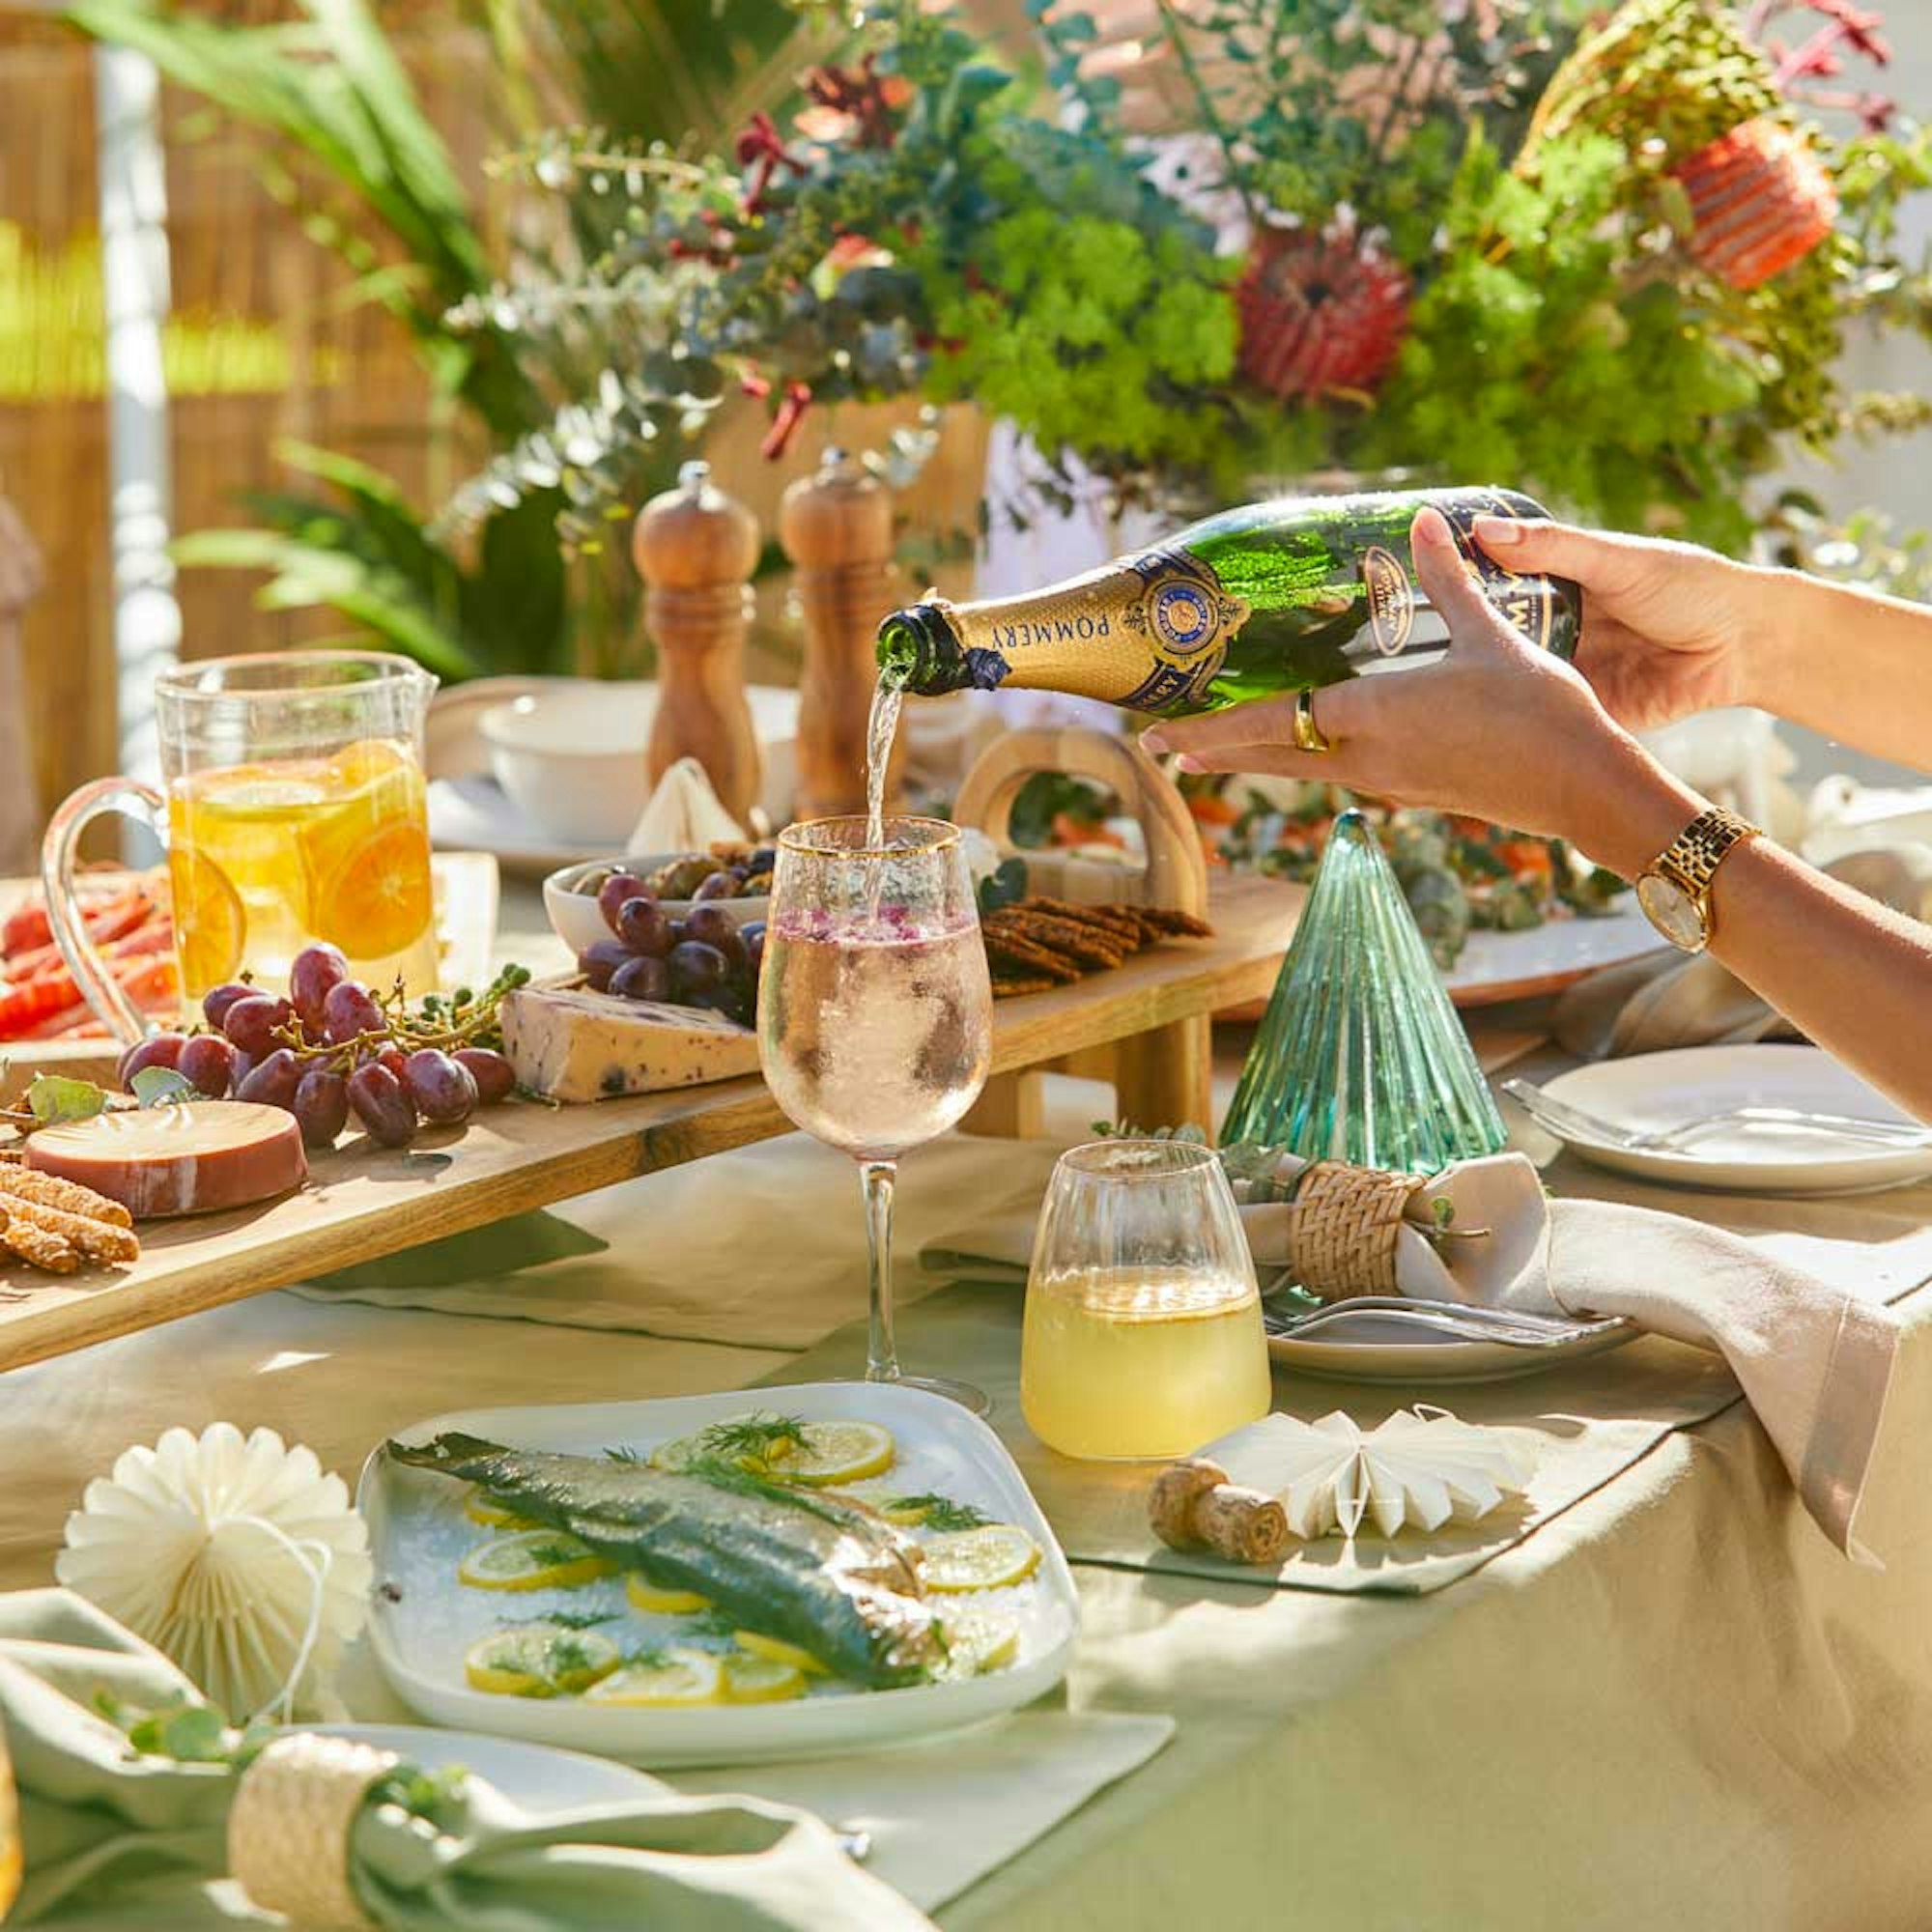 How to Style a Table setting in 8 Steps - House blog. Outdoor Christmas party with table linen, platters, wine glasses, and decorations.